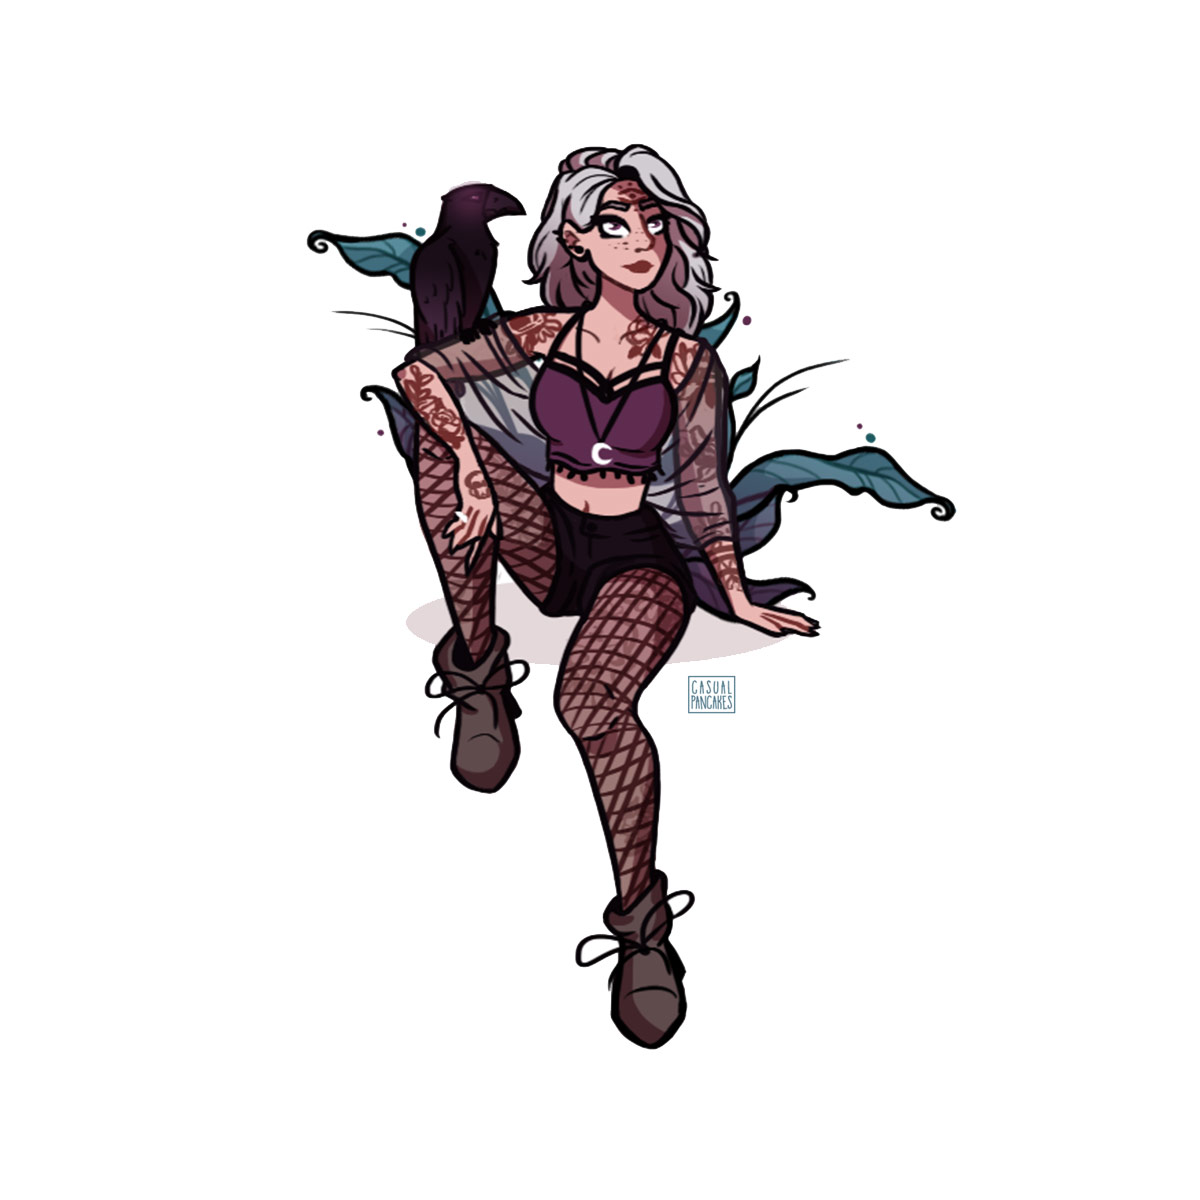 An-illustration-of-a-modern-day-witch-and-her-raven-familiar